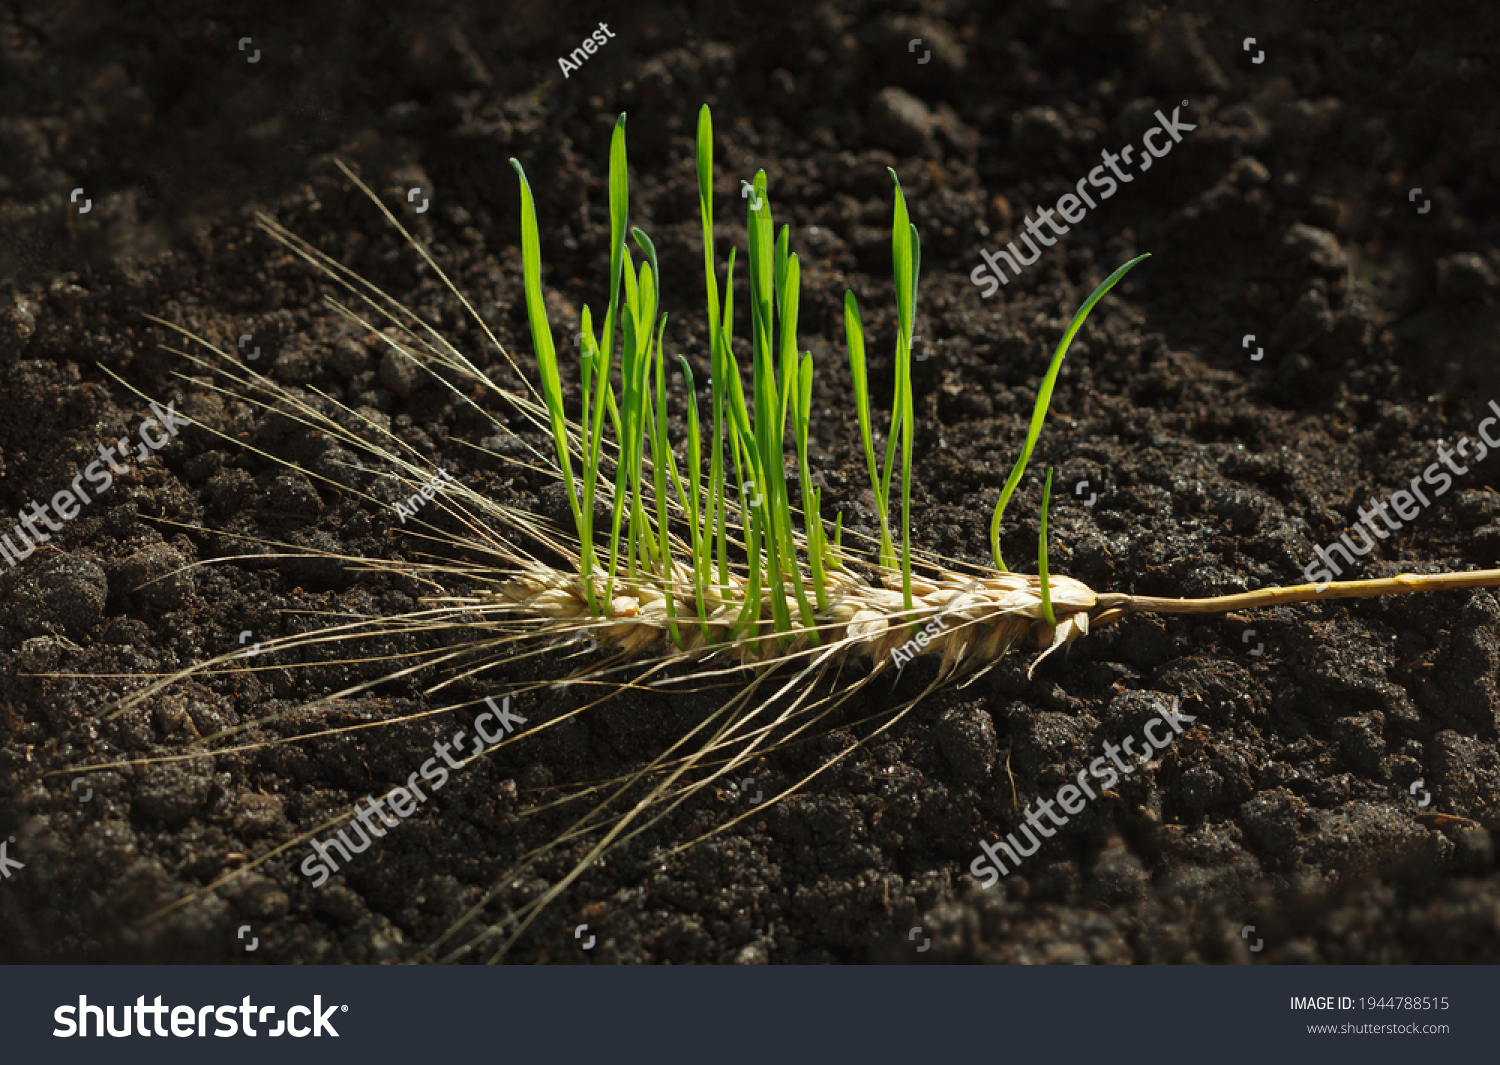 New wheat generation growing out of old ear on fertile soil, re-creation concept
 #1944788515